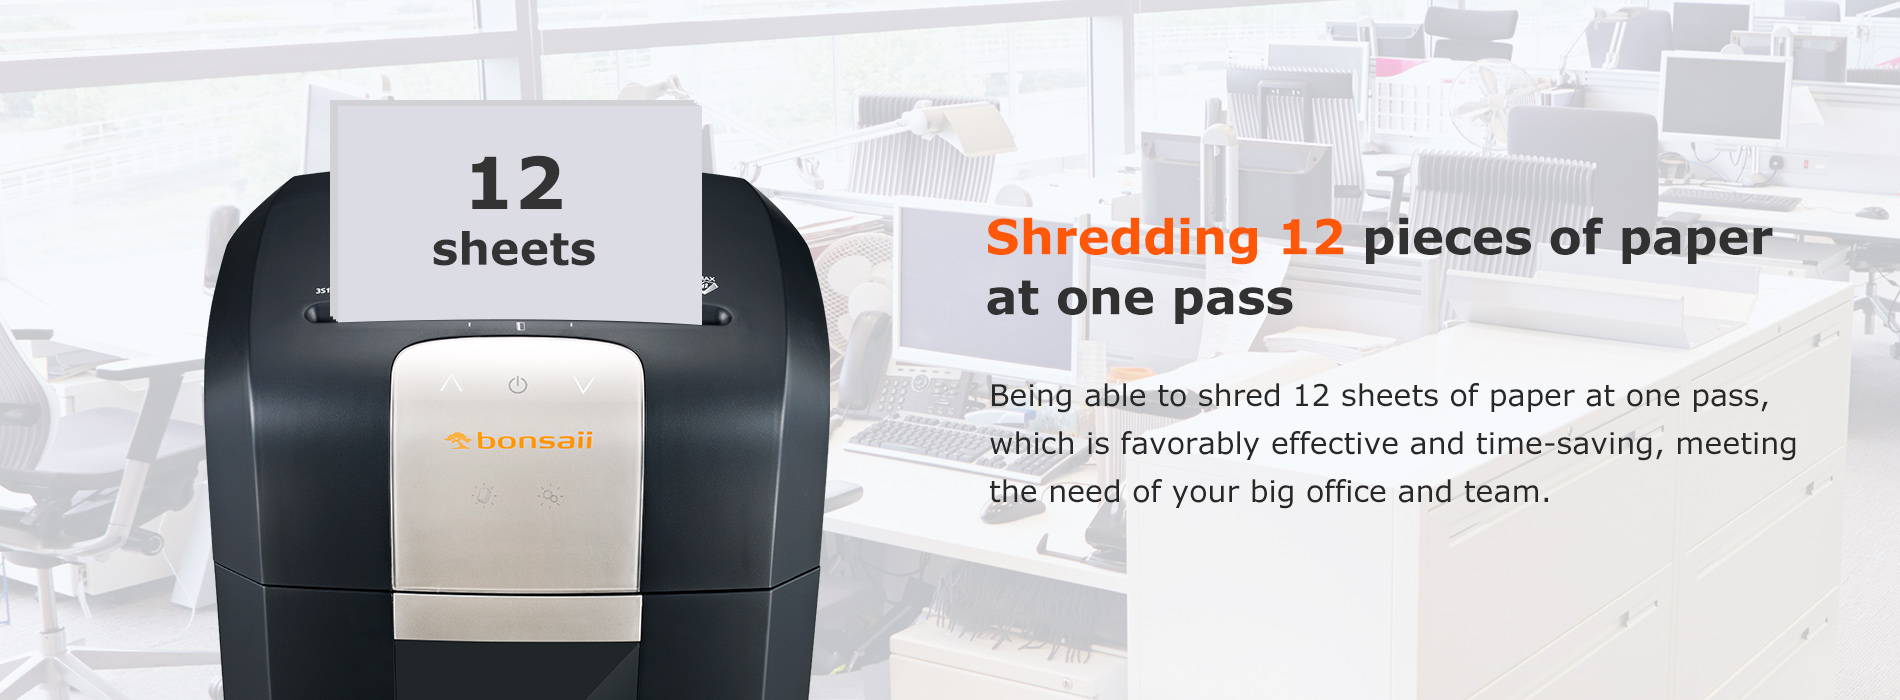 Shredding 12 pieces of paper at one pass Being able to shred 12 sheets of paper at one pass, which is favorably effective and time-saving, meeting the need of your big office and team.